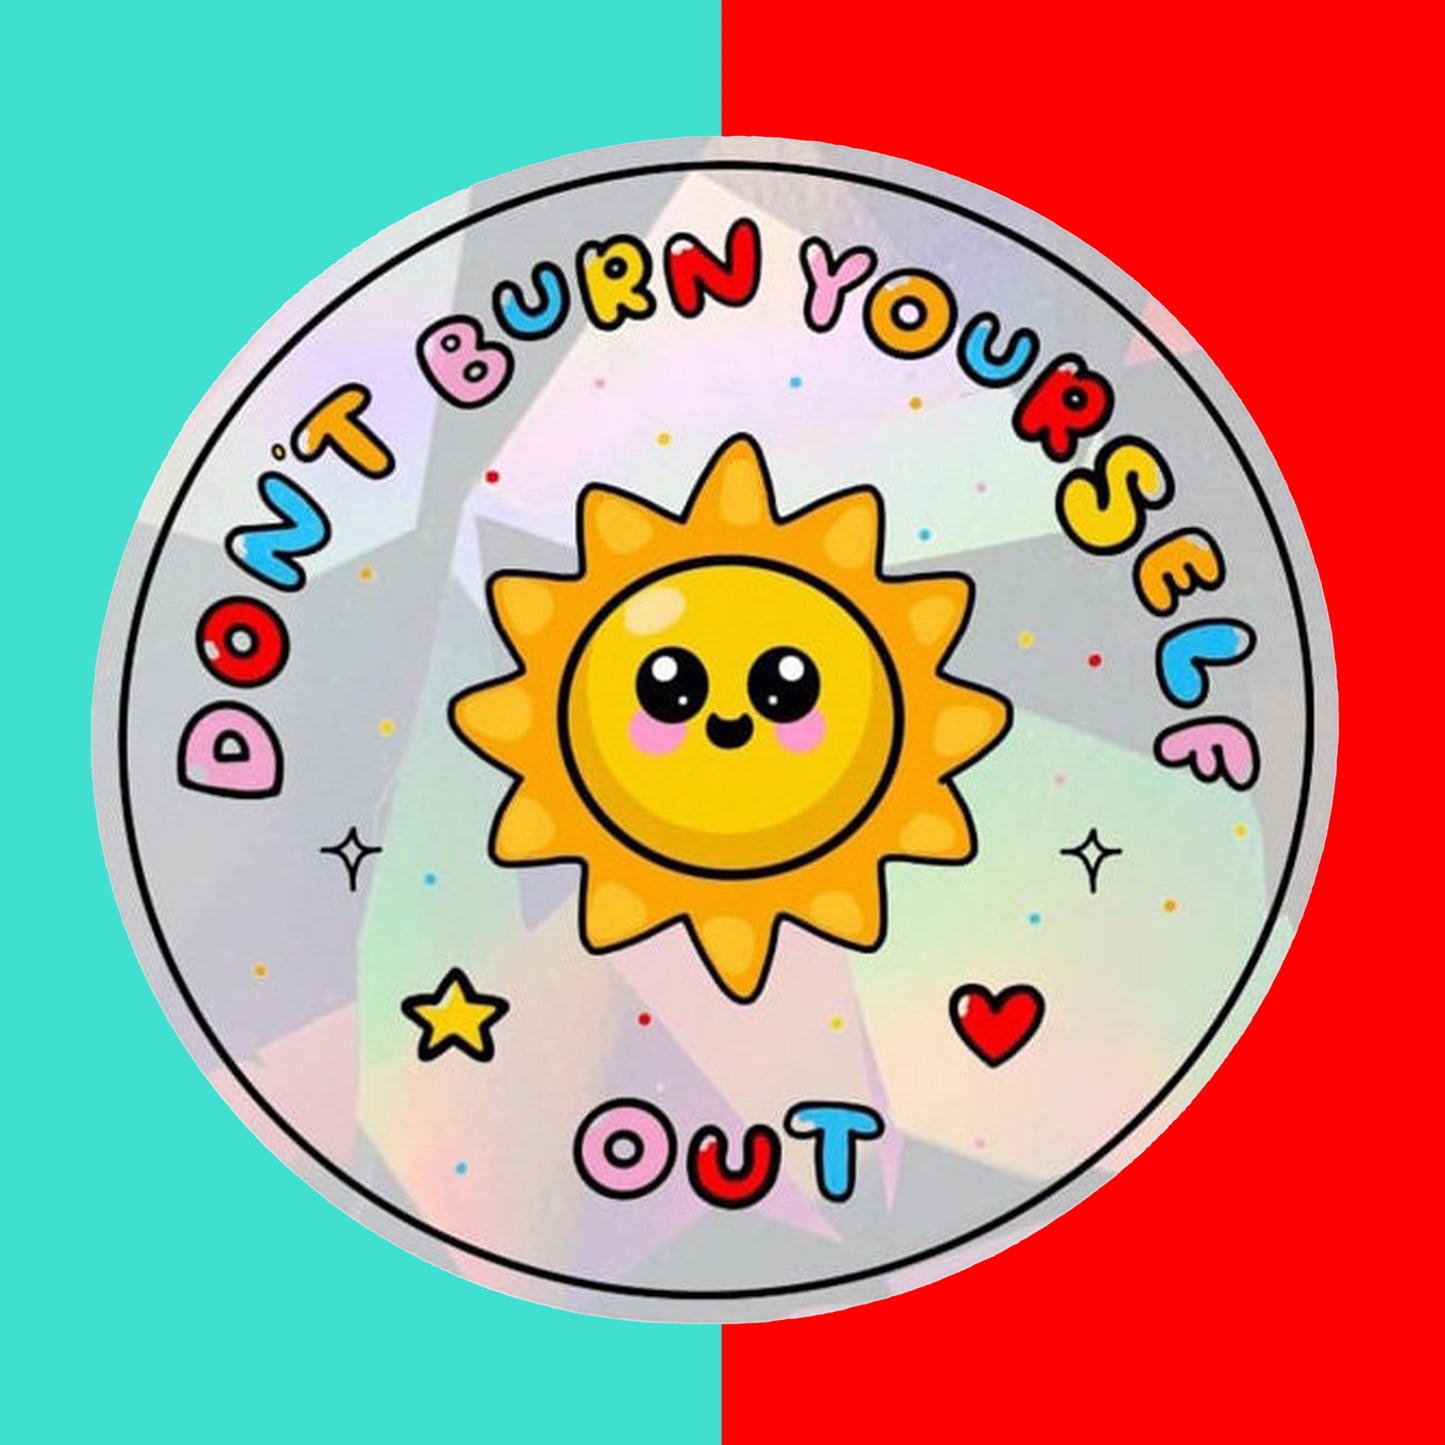 The Don't Burn Yourself Out Sun Catcher Rainbow Window Sticker on a red and blue background. The circle holographic sticker features a smiling sunshine with pink blush in the middle with rainbow bubble writing reading 'don't burn yourself out' with a yellow star, red heart, black sparkle outlines and rainbow dots all over. The design is inspired by self care.